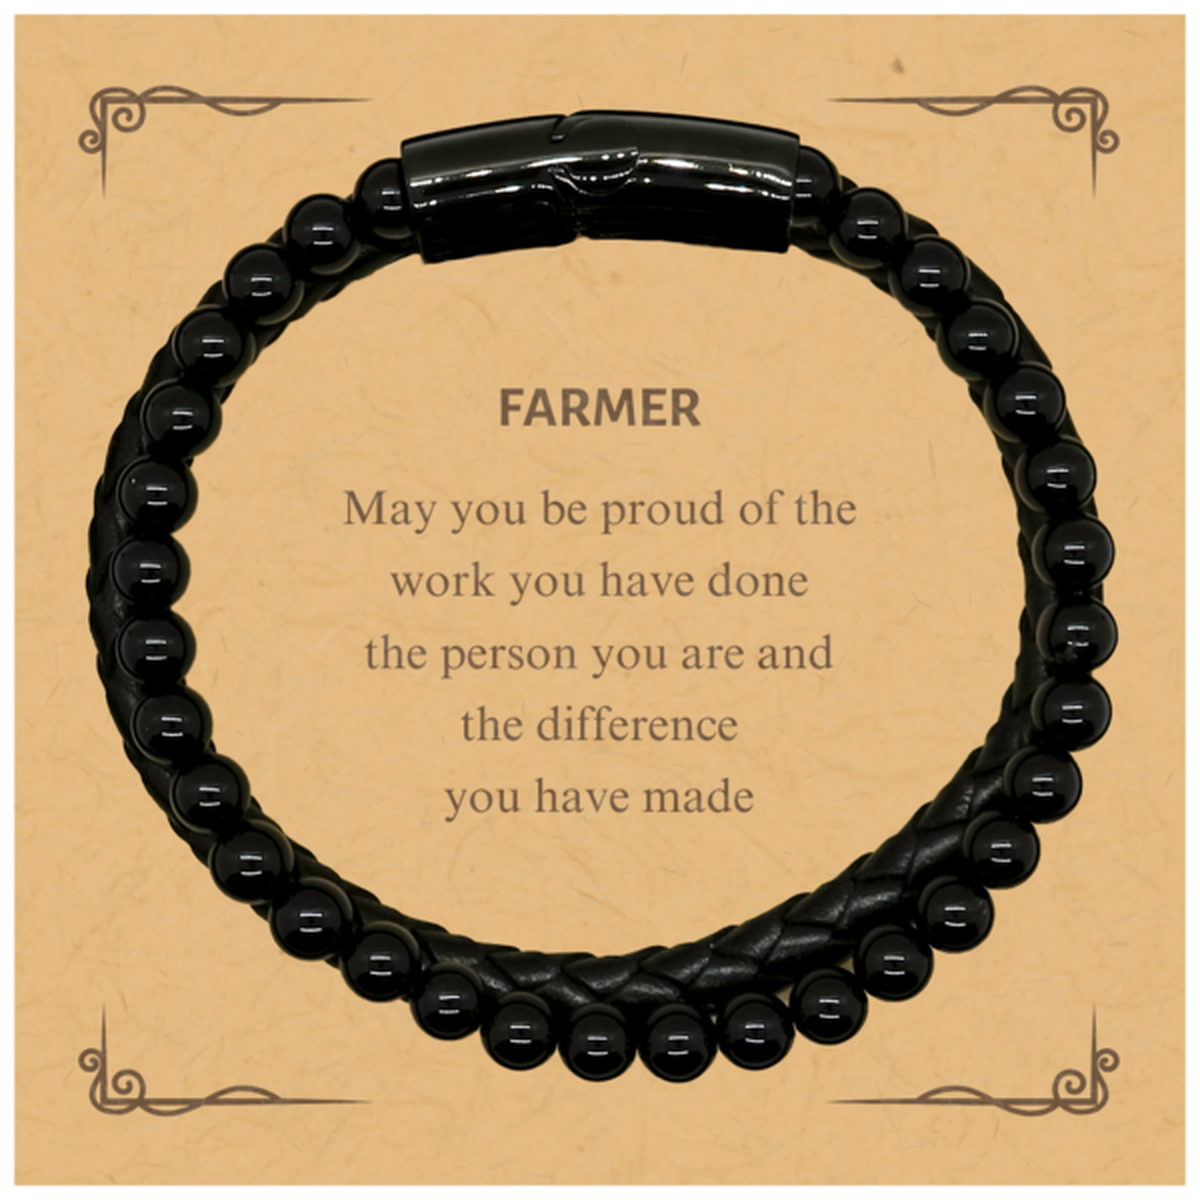 Farmer May you be proud of the work you have done, Retirement Farmer Stone Leather Bracelets for Colleague Appreciation Gifts Amazing for Farmer